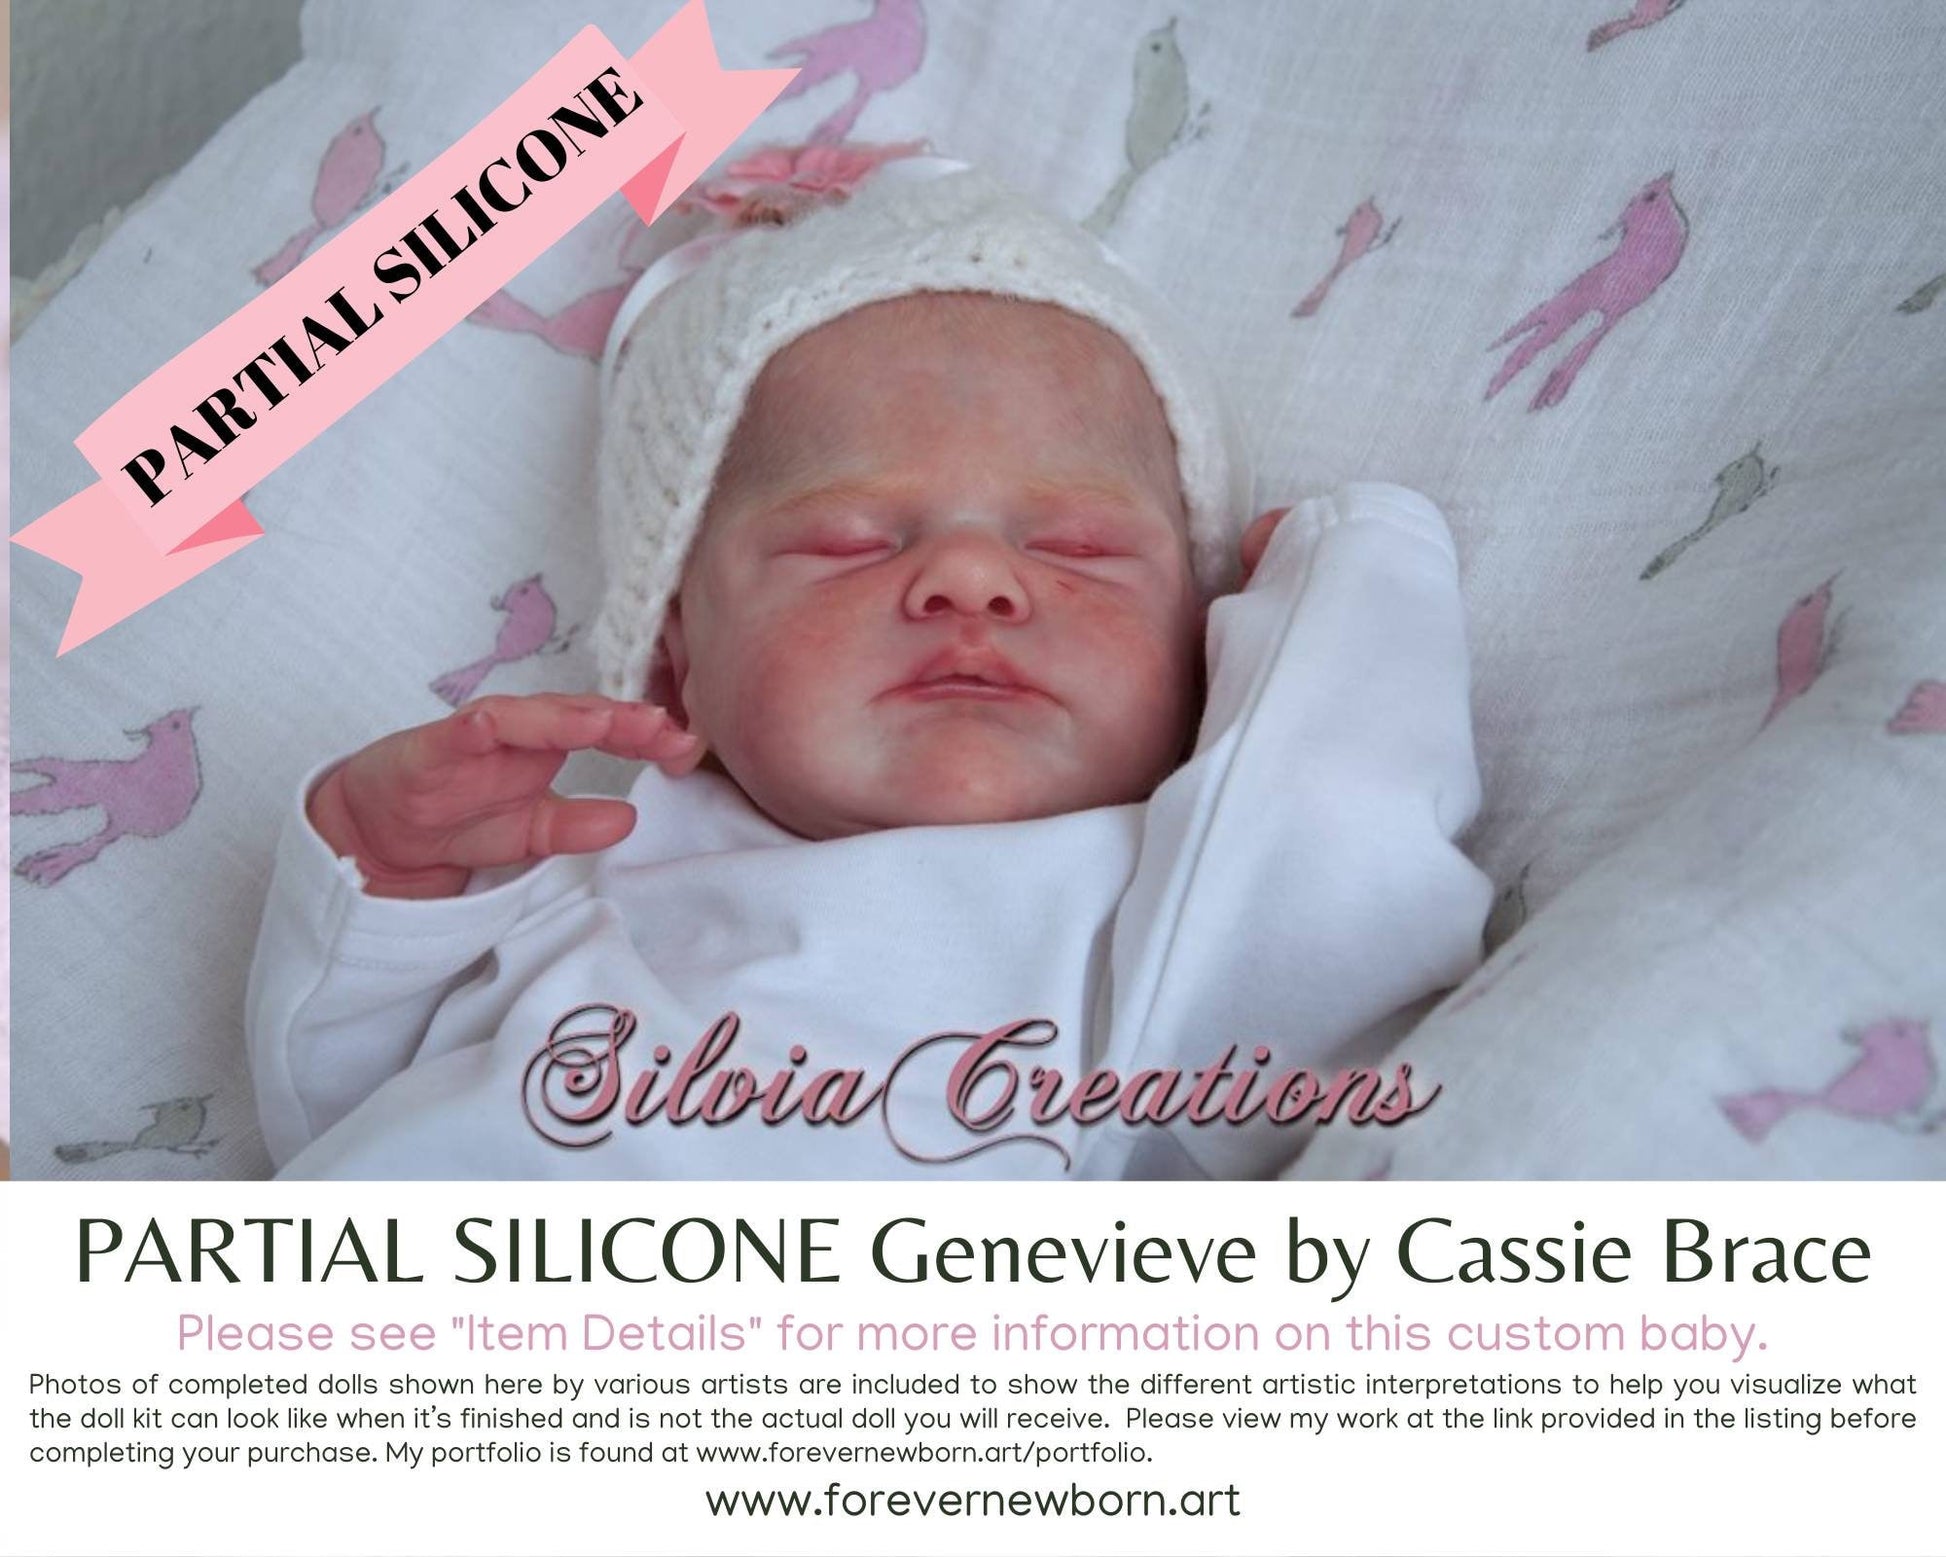 SiLiCoNe BaBy Genevieve by Cassie Brace (18"+ Full Limbs) with cloth body. Extended Processing Time May Be Required. ASK FIRST!